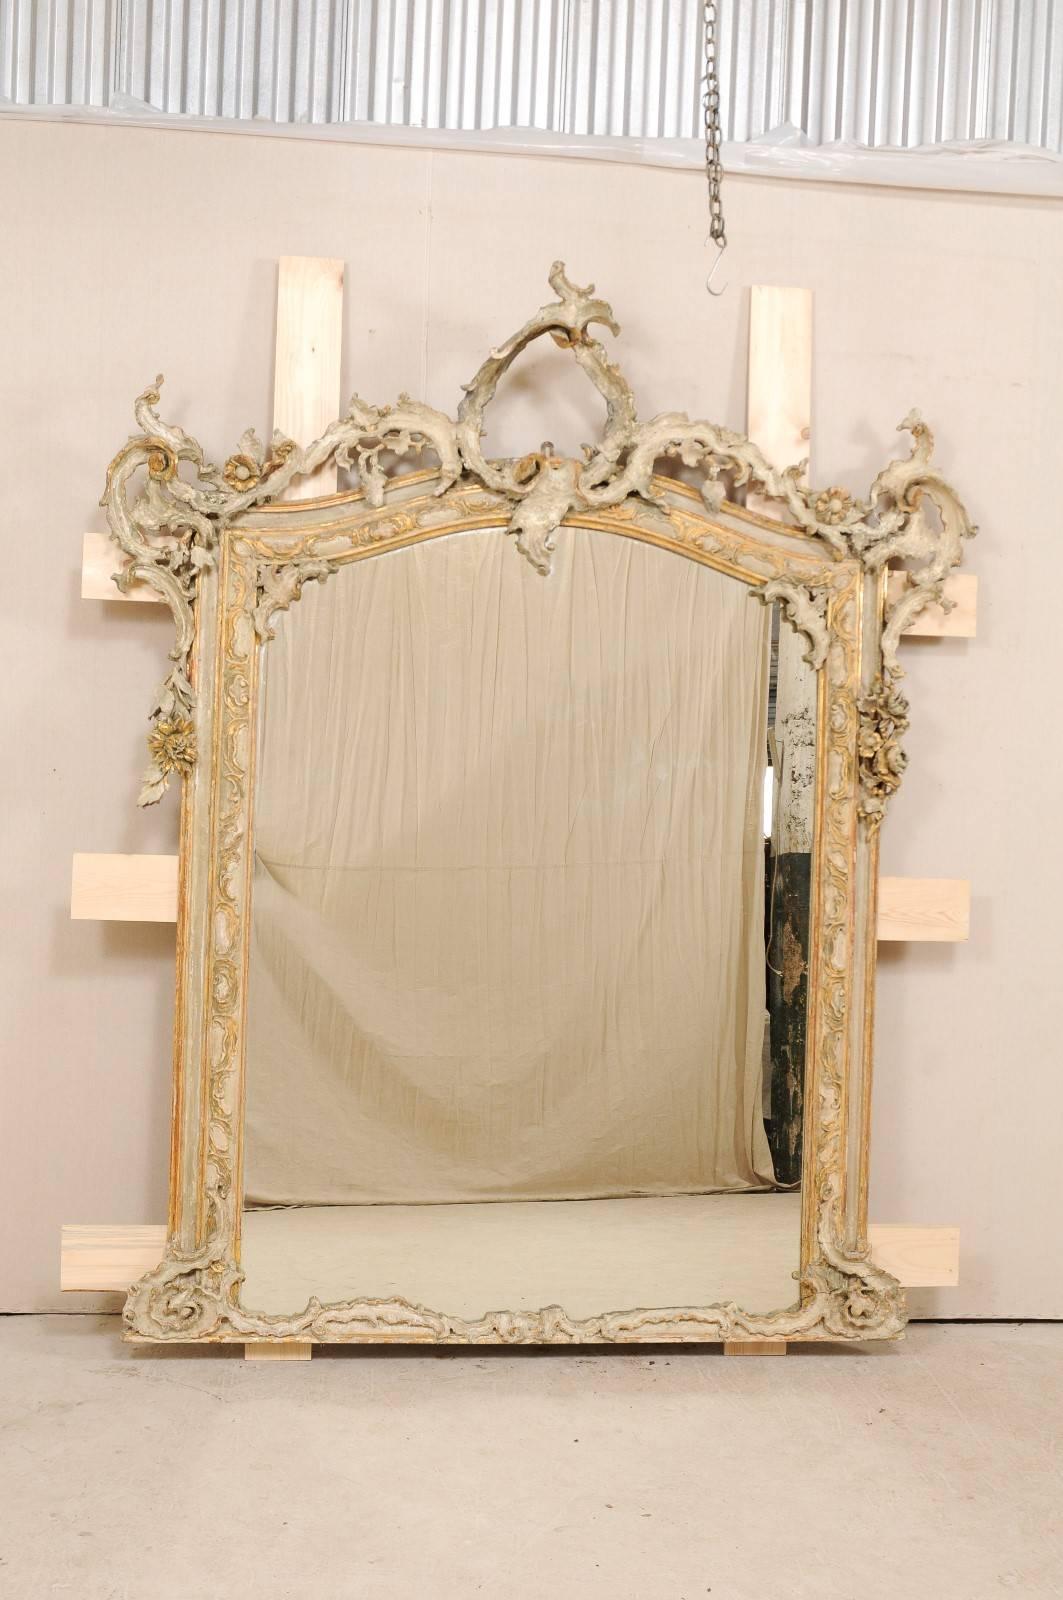 A magnificent Italian Baroque style mirror from the early 19th century. This antique Italian mirror is grand in scale, standing at approximately 7.5 feet tall, and over 6 feet wide. Finely hand-carved Baroque style detailing, in a rich foliage